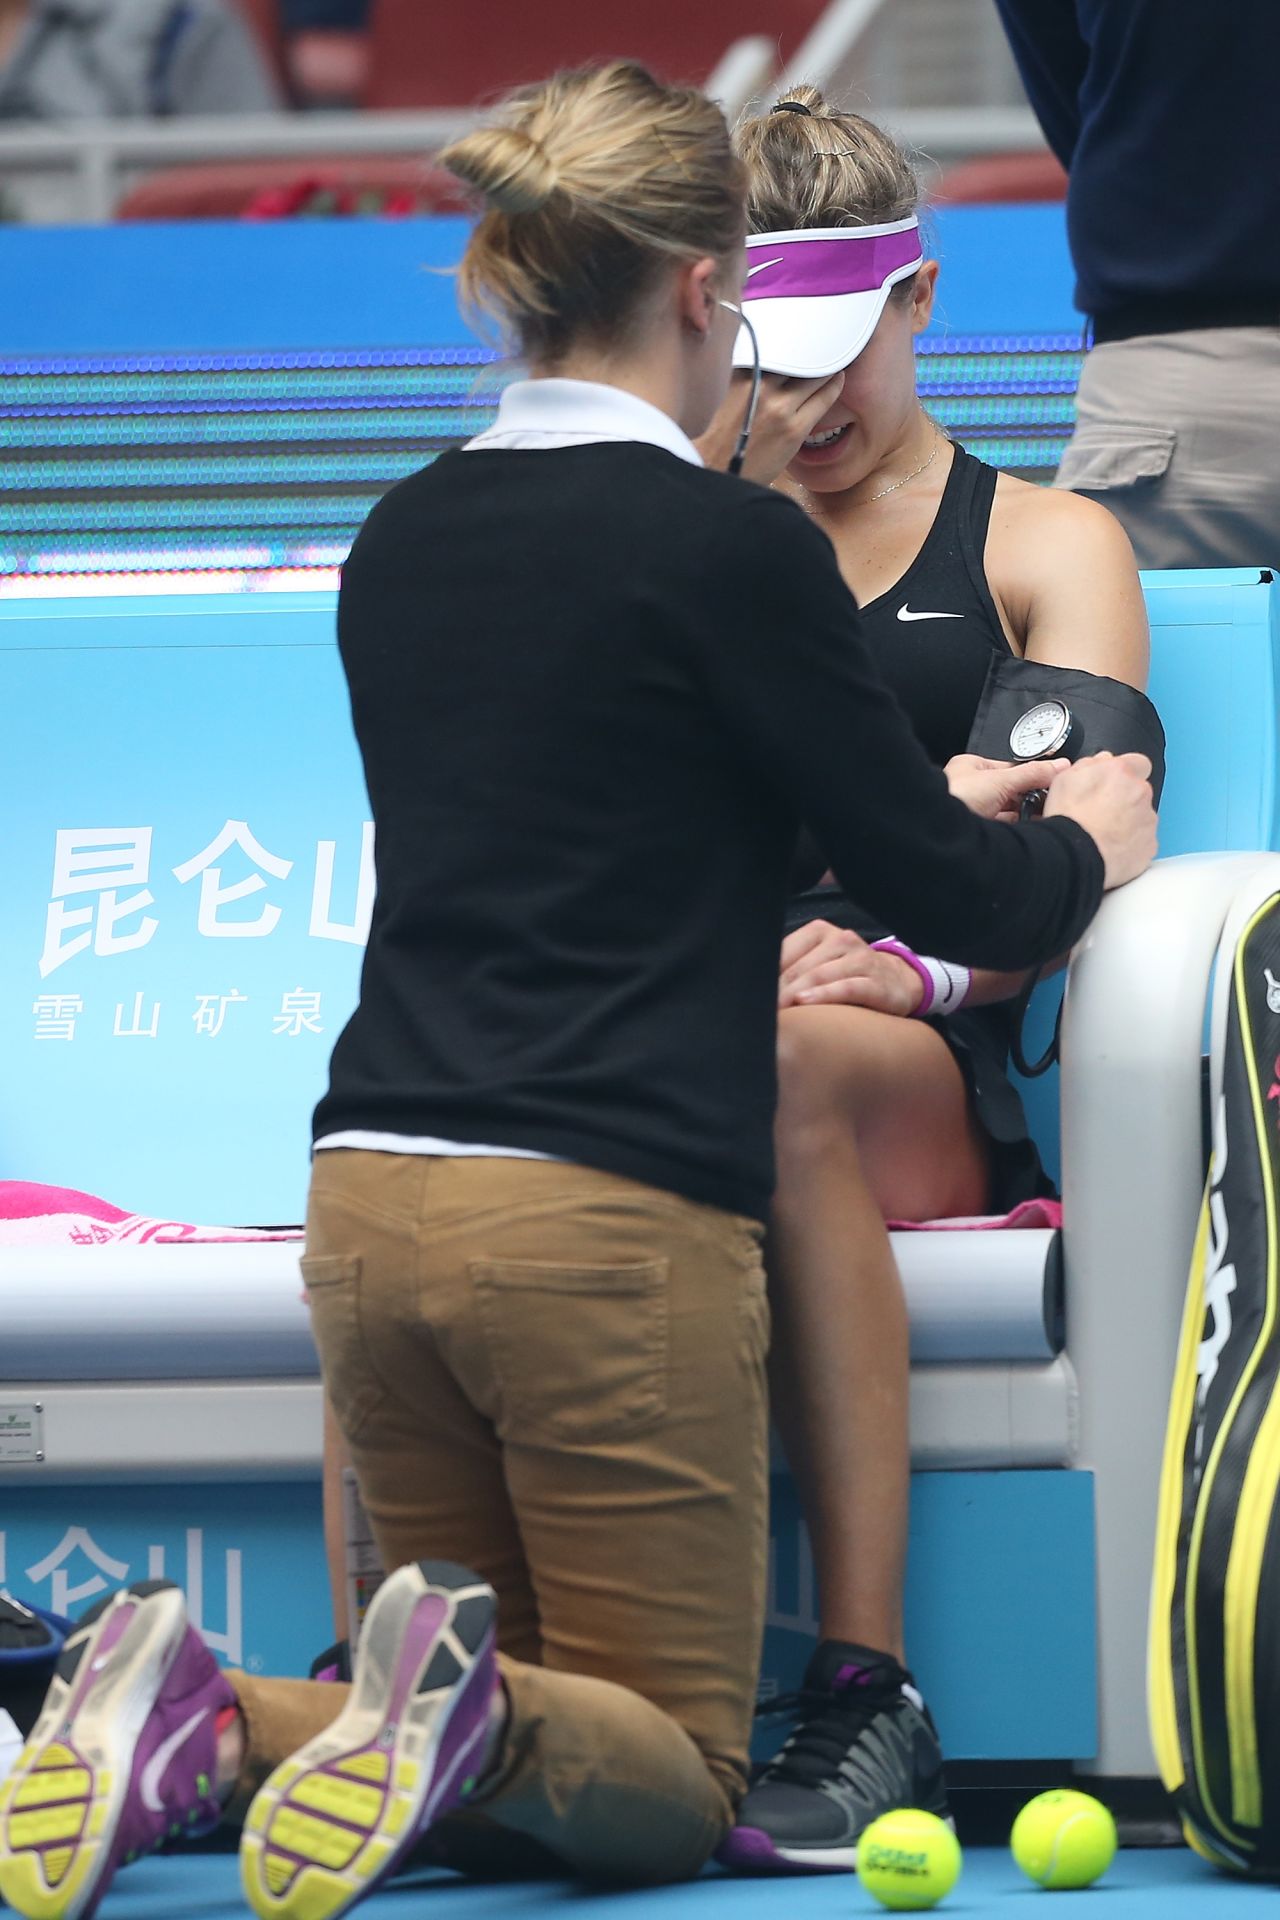 A visibly distressed Bouchard is pictured receiving treatment on court at the China Open before her retirement.